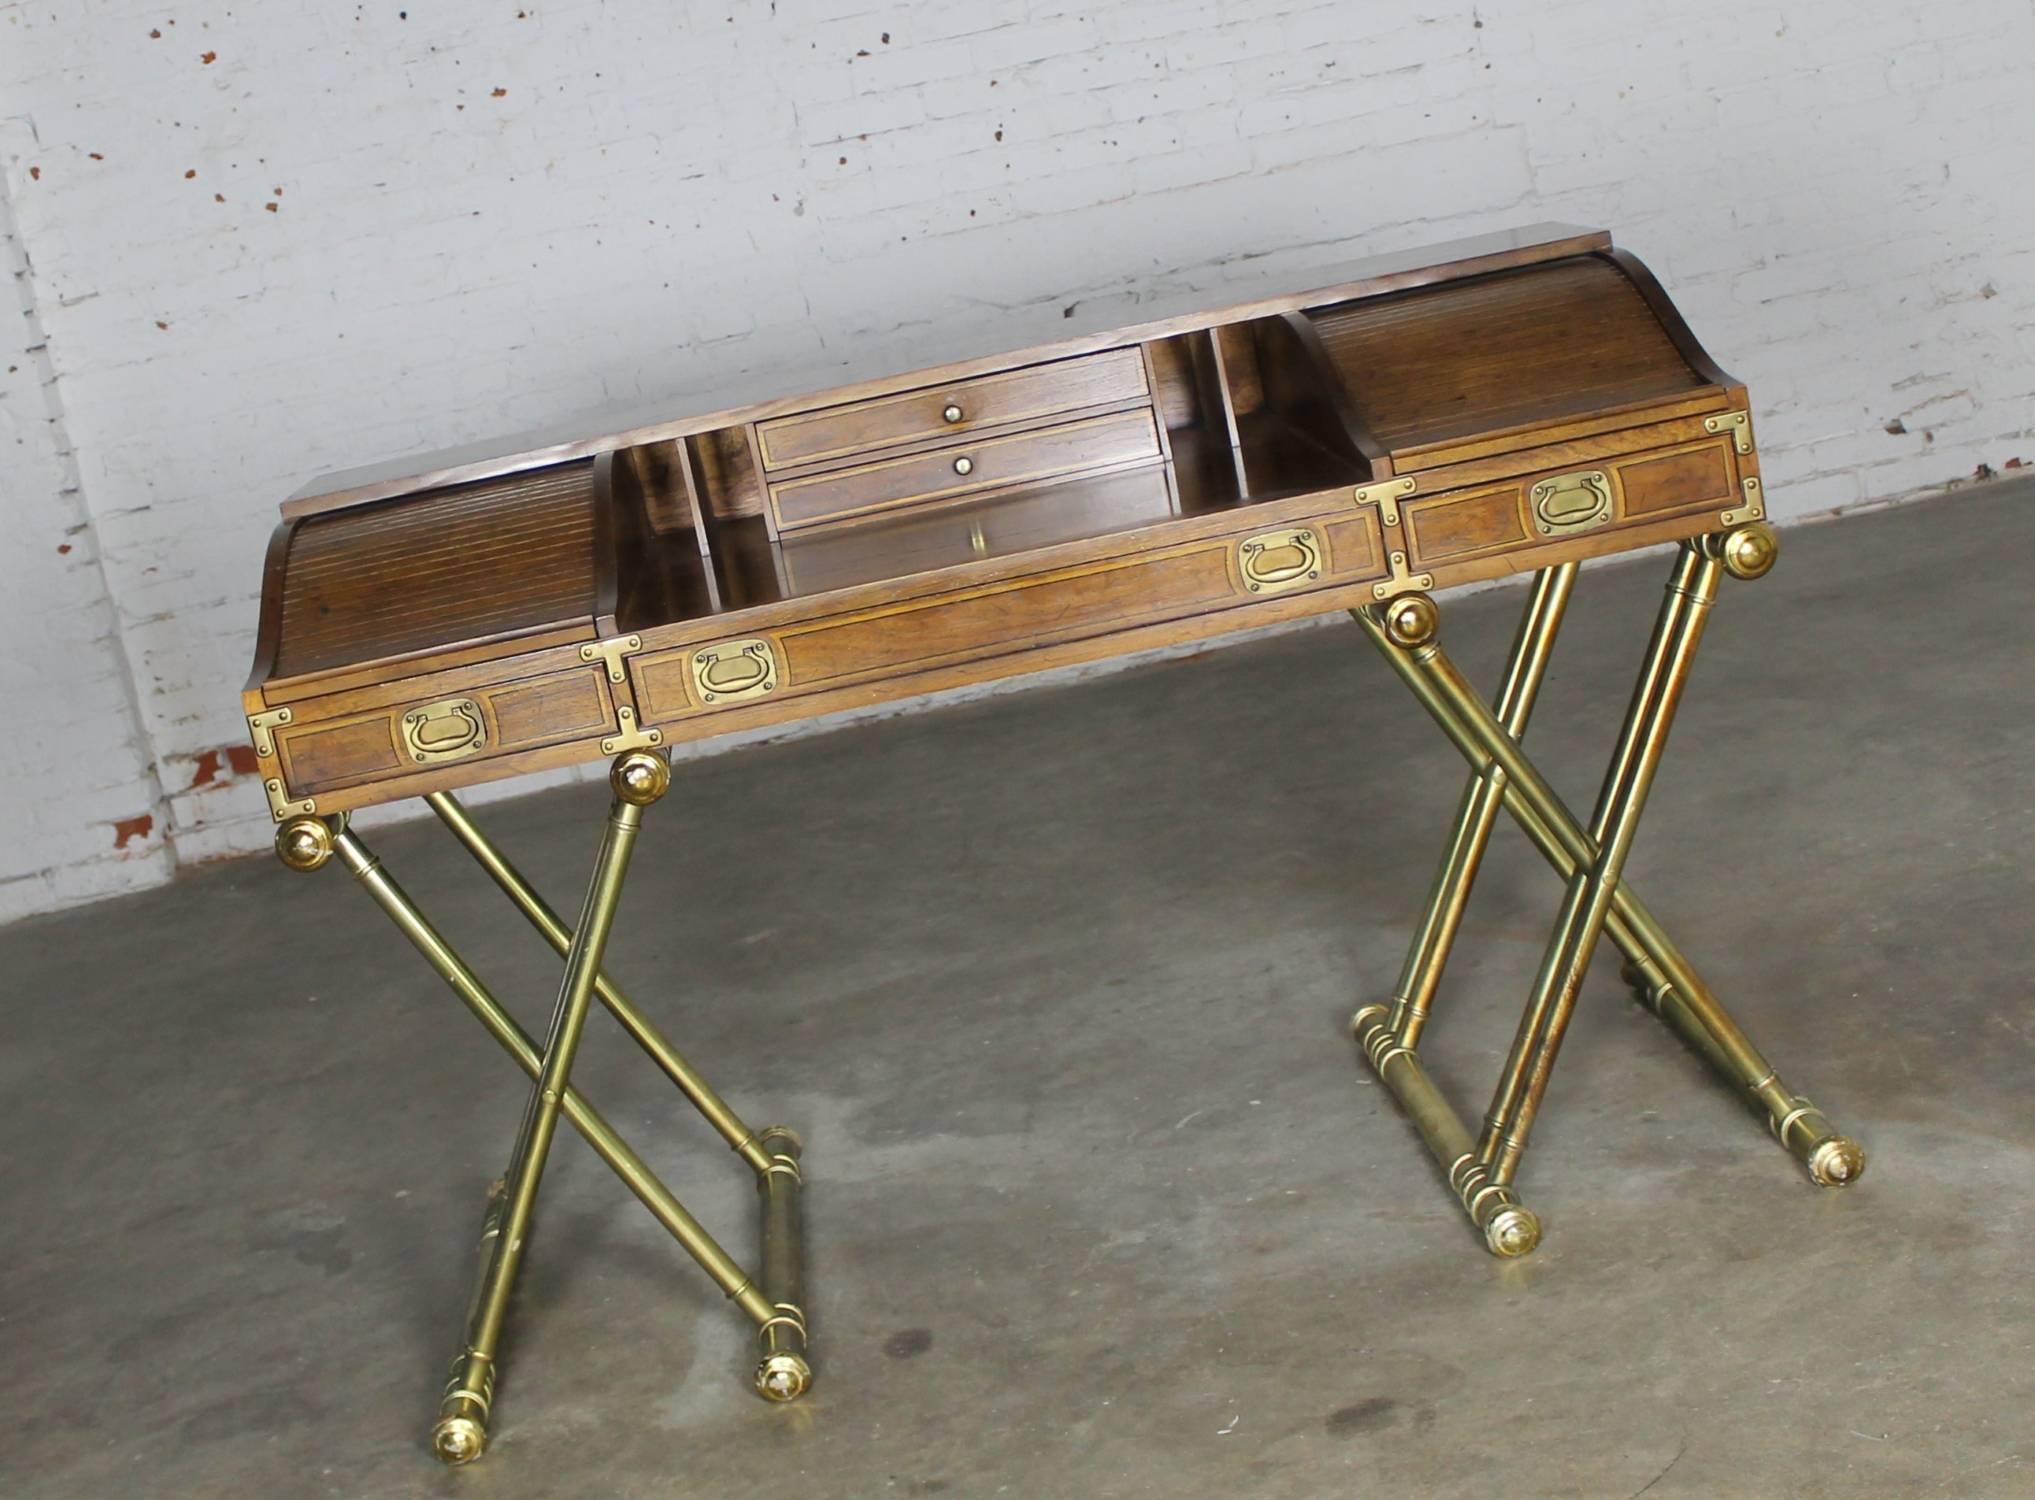 Fabulous vintage Campaign style low roll top desk with gilt X-leg base by Drexel. This desk is in great vintage condition; however, there are nicks and dings as you would expect with age. Please see photos.

This is such a handsome desk by Drexel